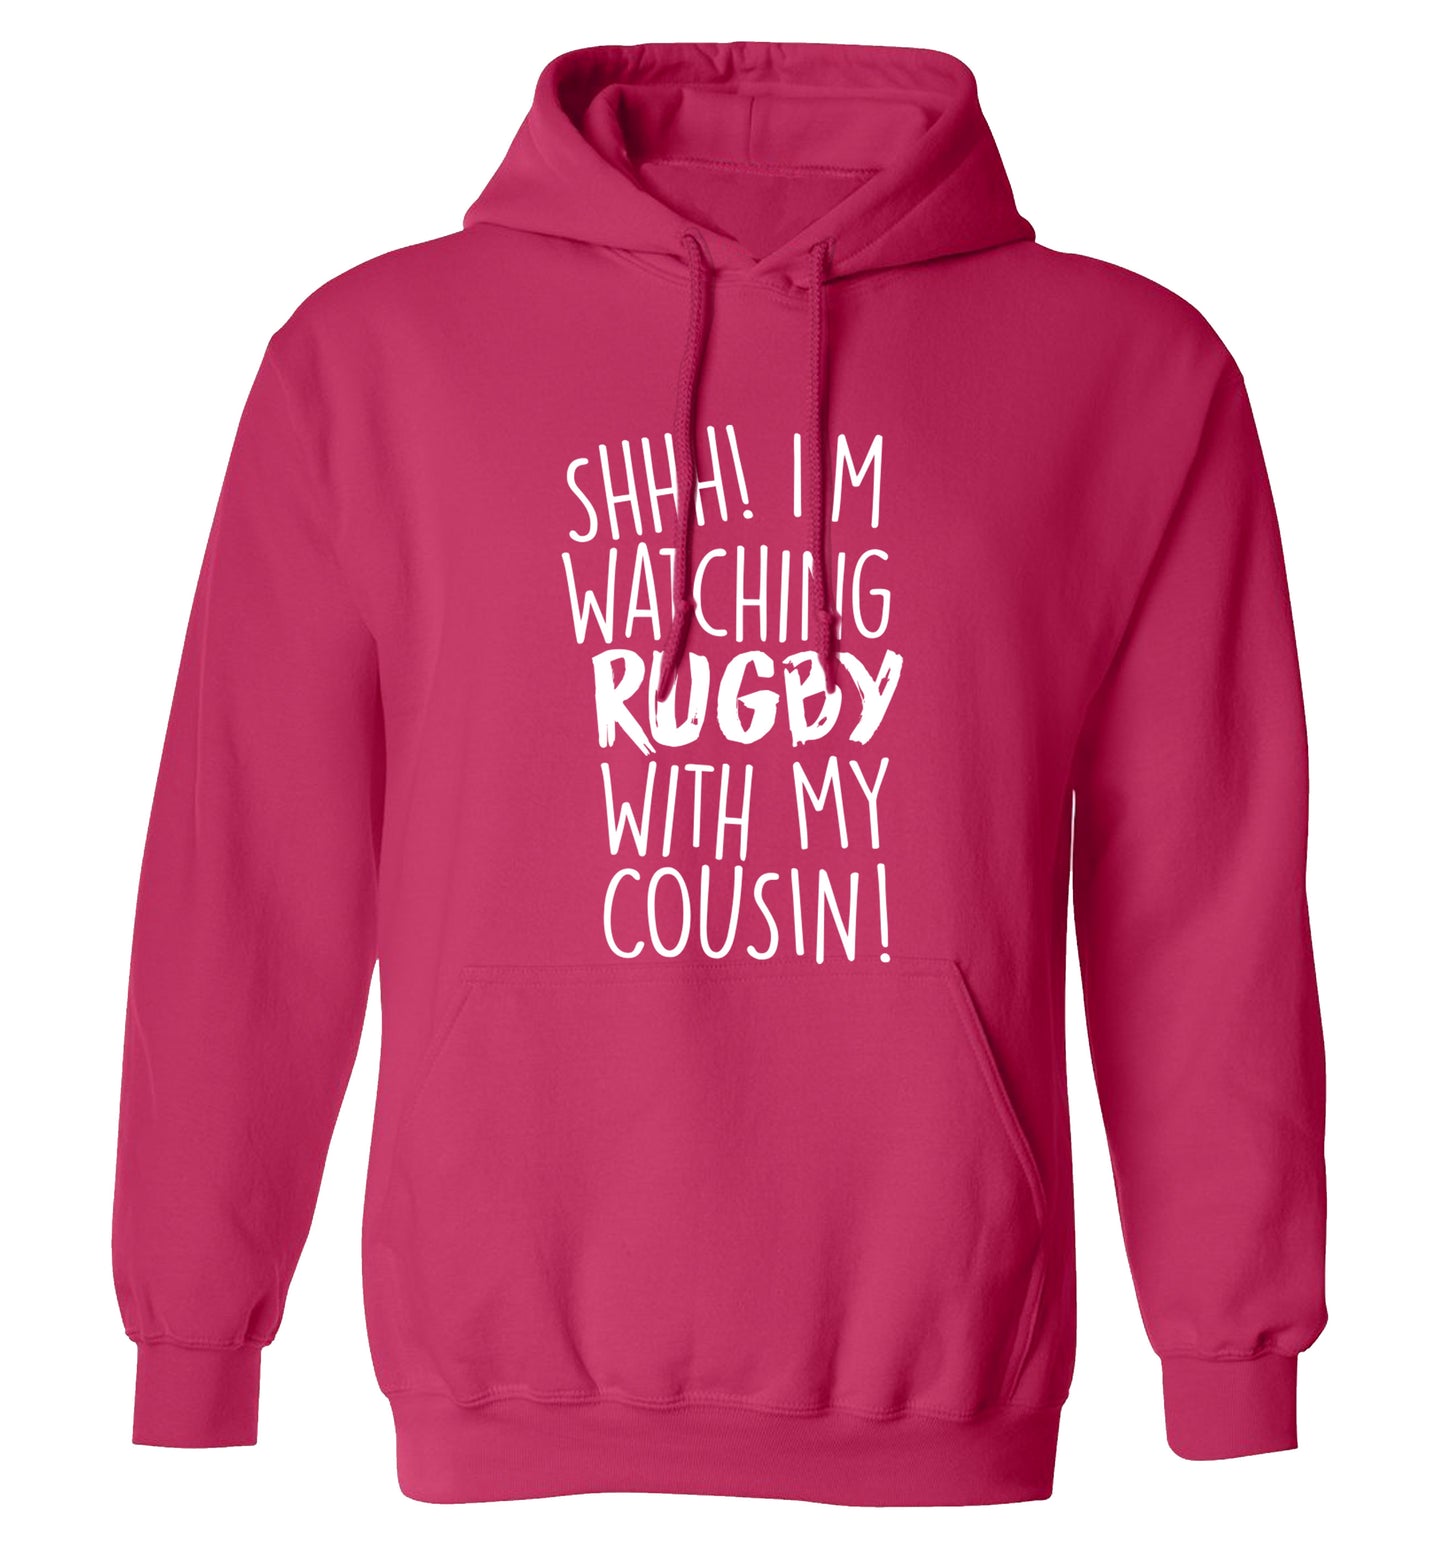 Shhh I'm watching rugby with my cousin adults unisex pink hoodie 2XL